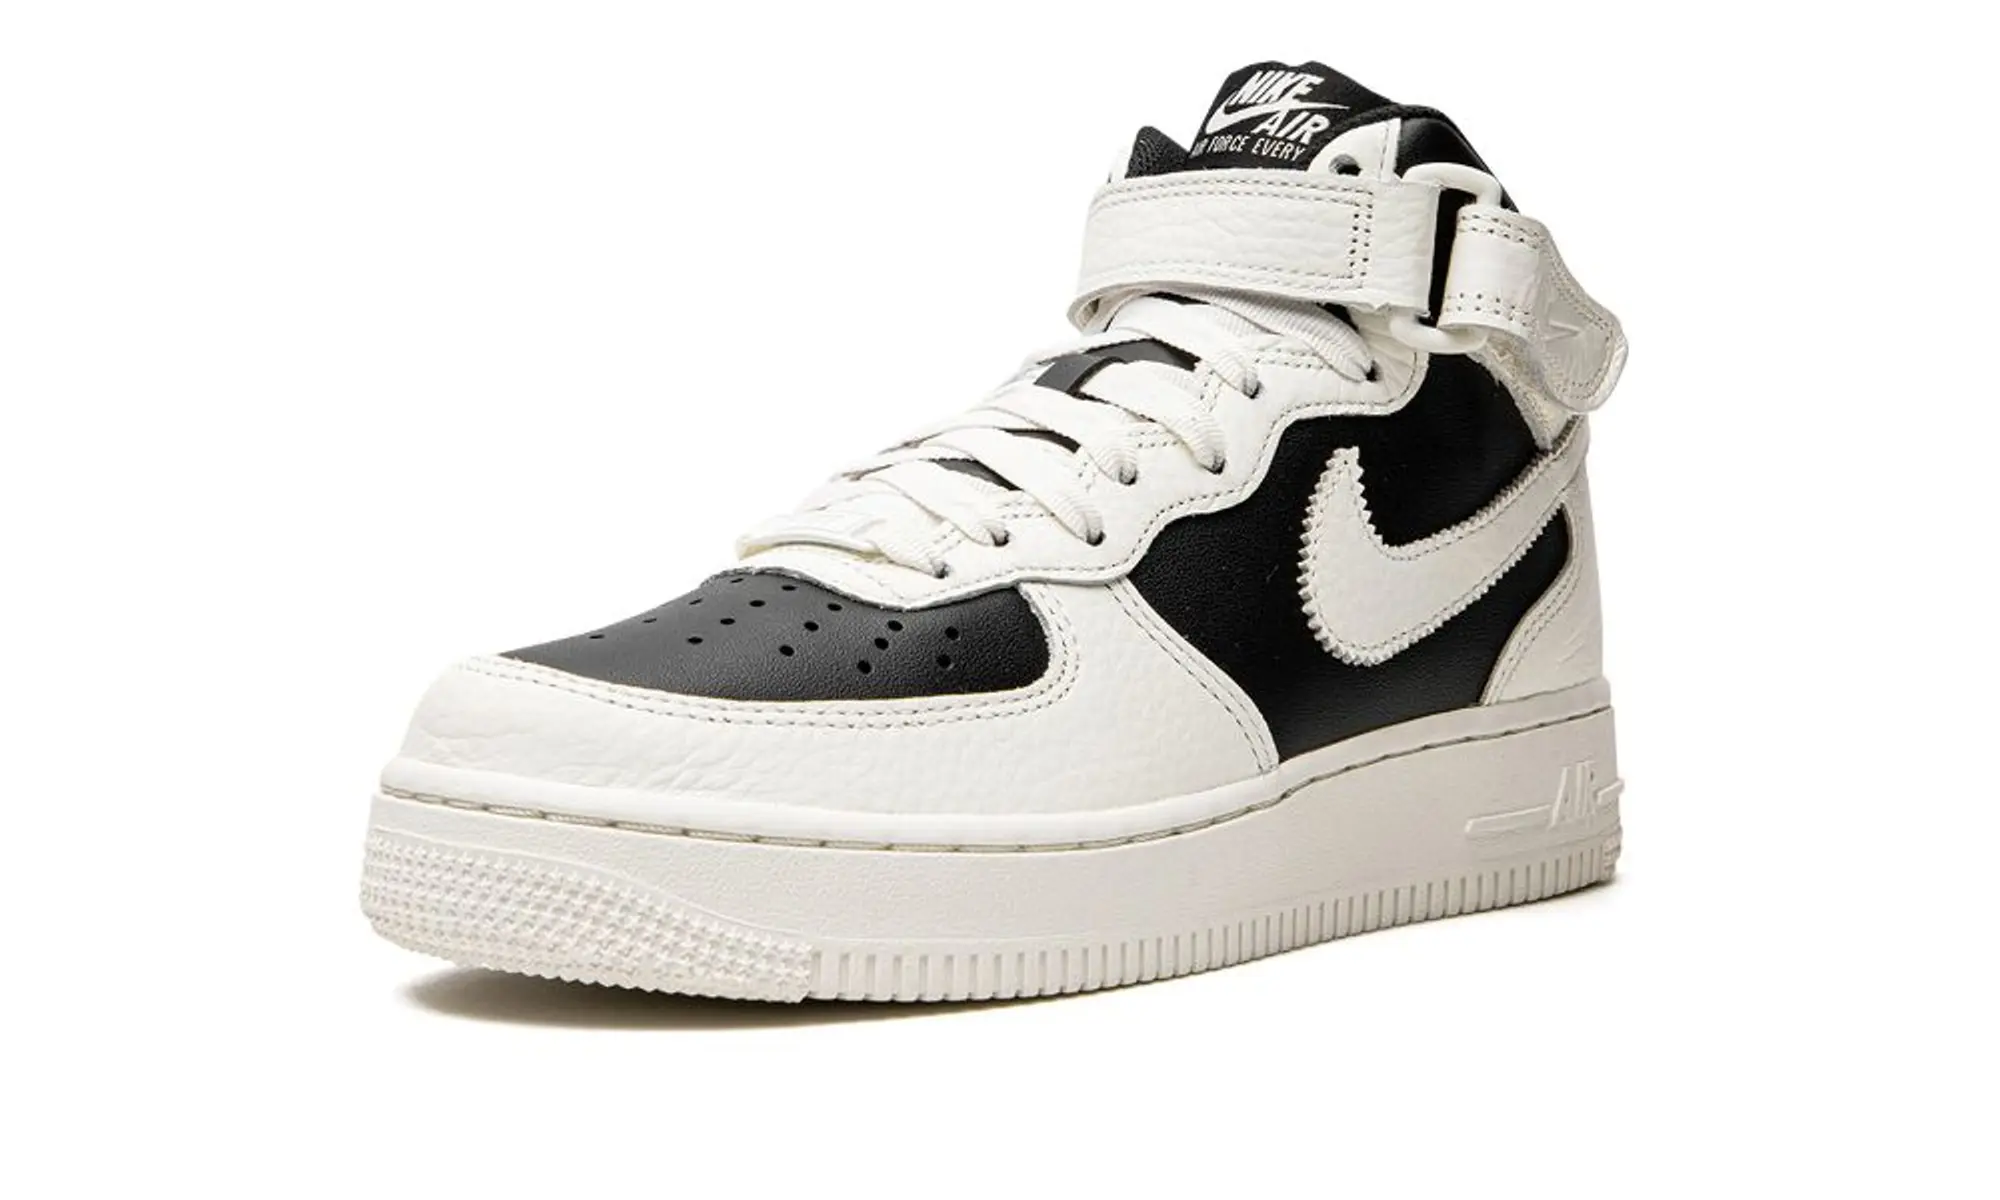 Nike Womens AIR FORCE 1 '07 MID Black Sial Shoes